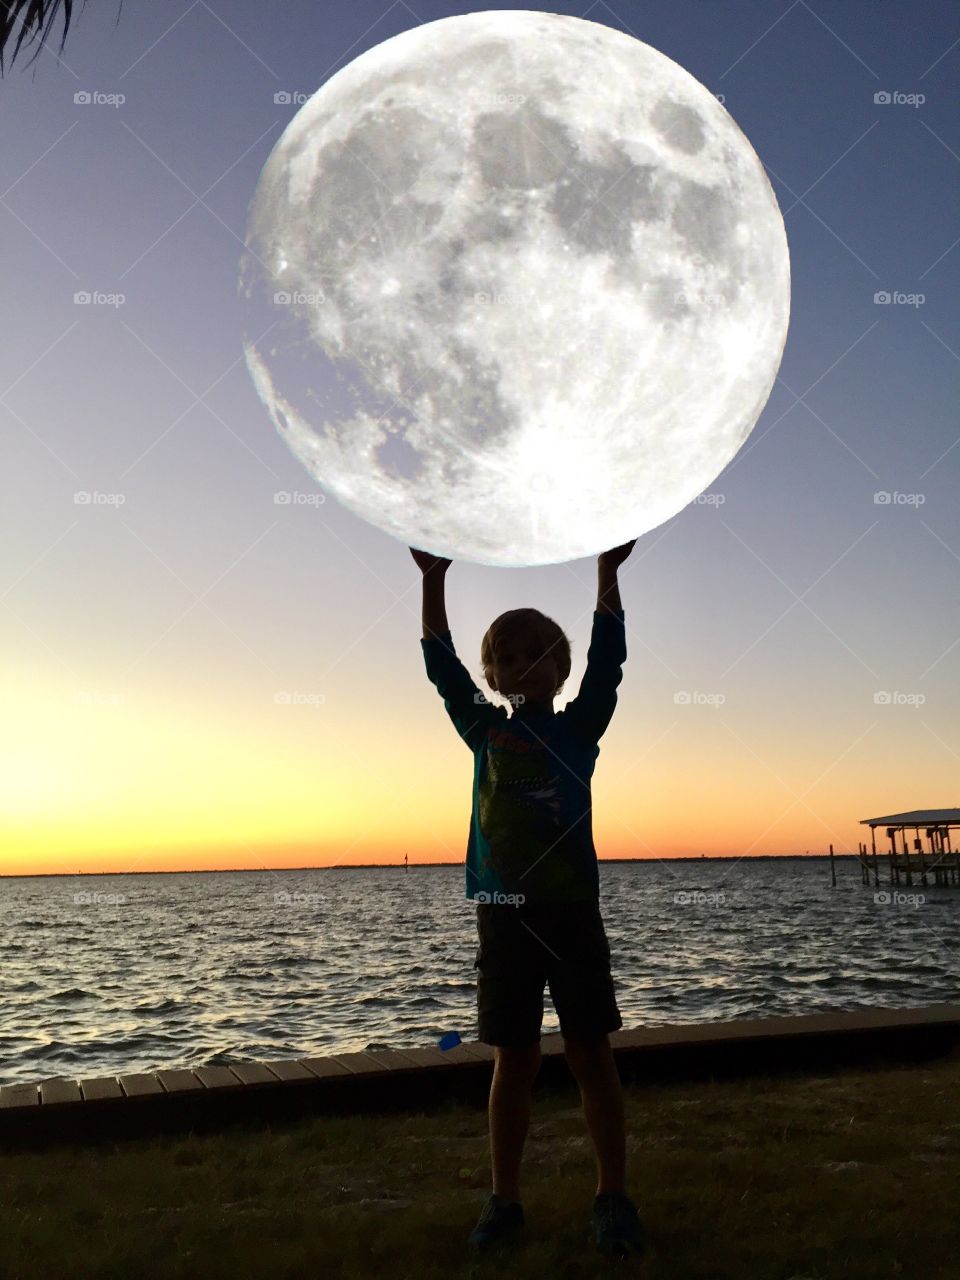 He's Got the Whole Moon In His Hands